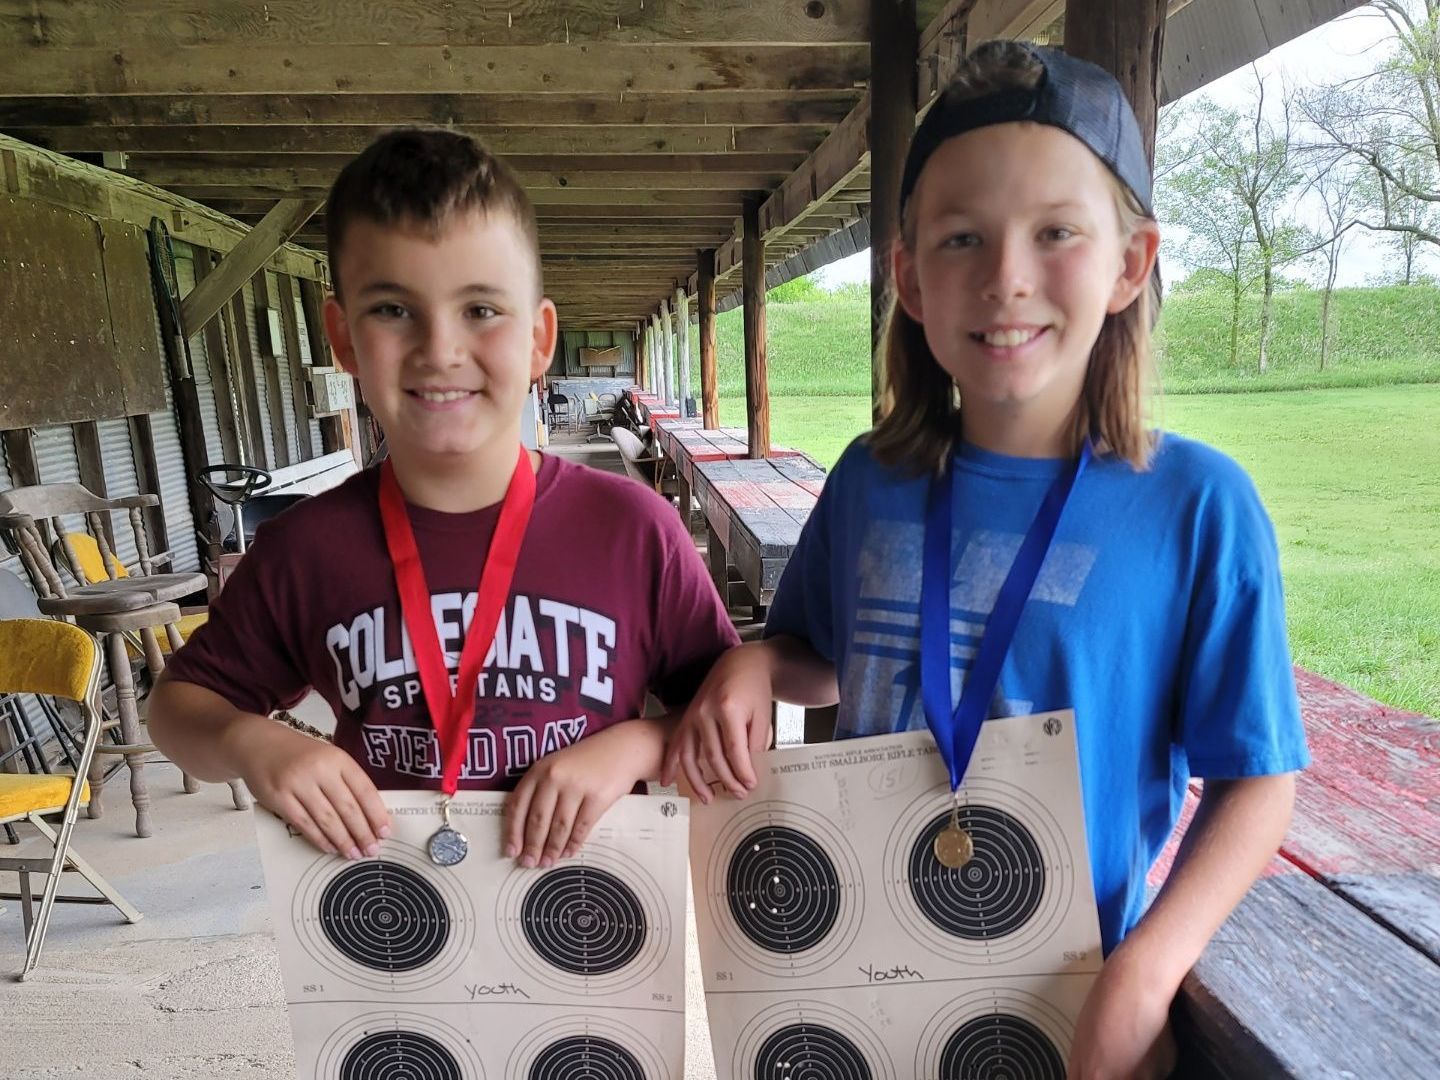 a boy and a girl posing with their target sheets at gun range